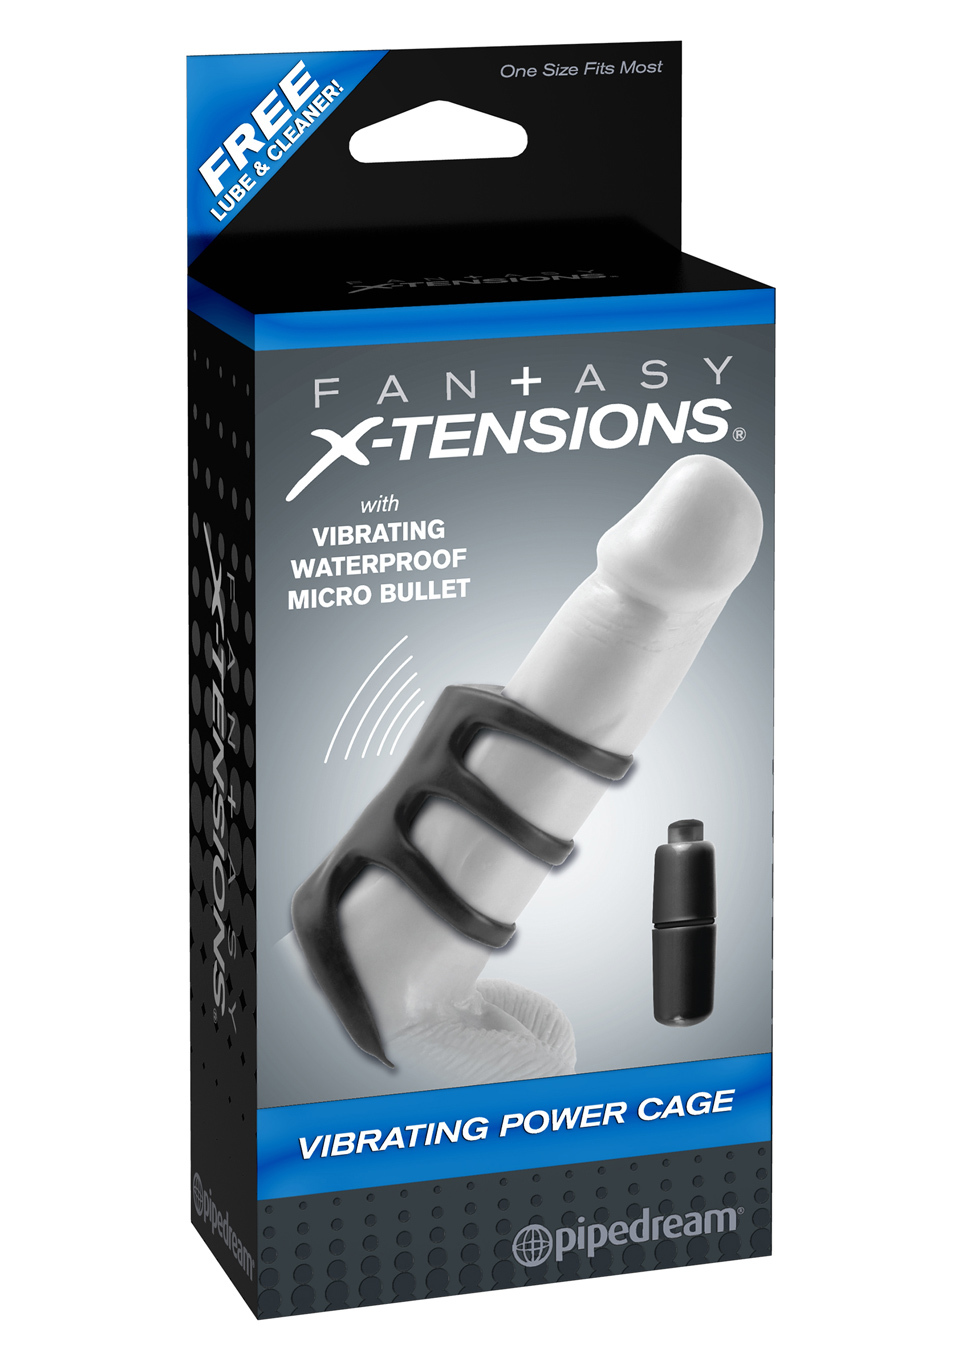 FANTASY X-TENSIONS VIBRATING POWER CAGE